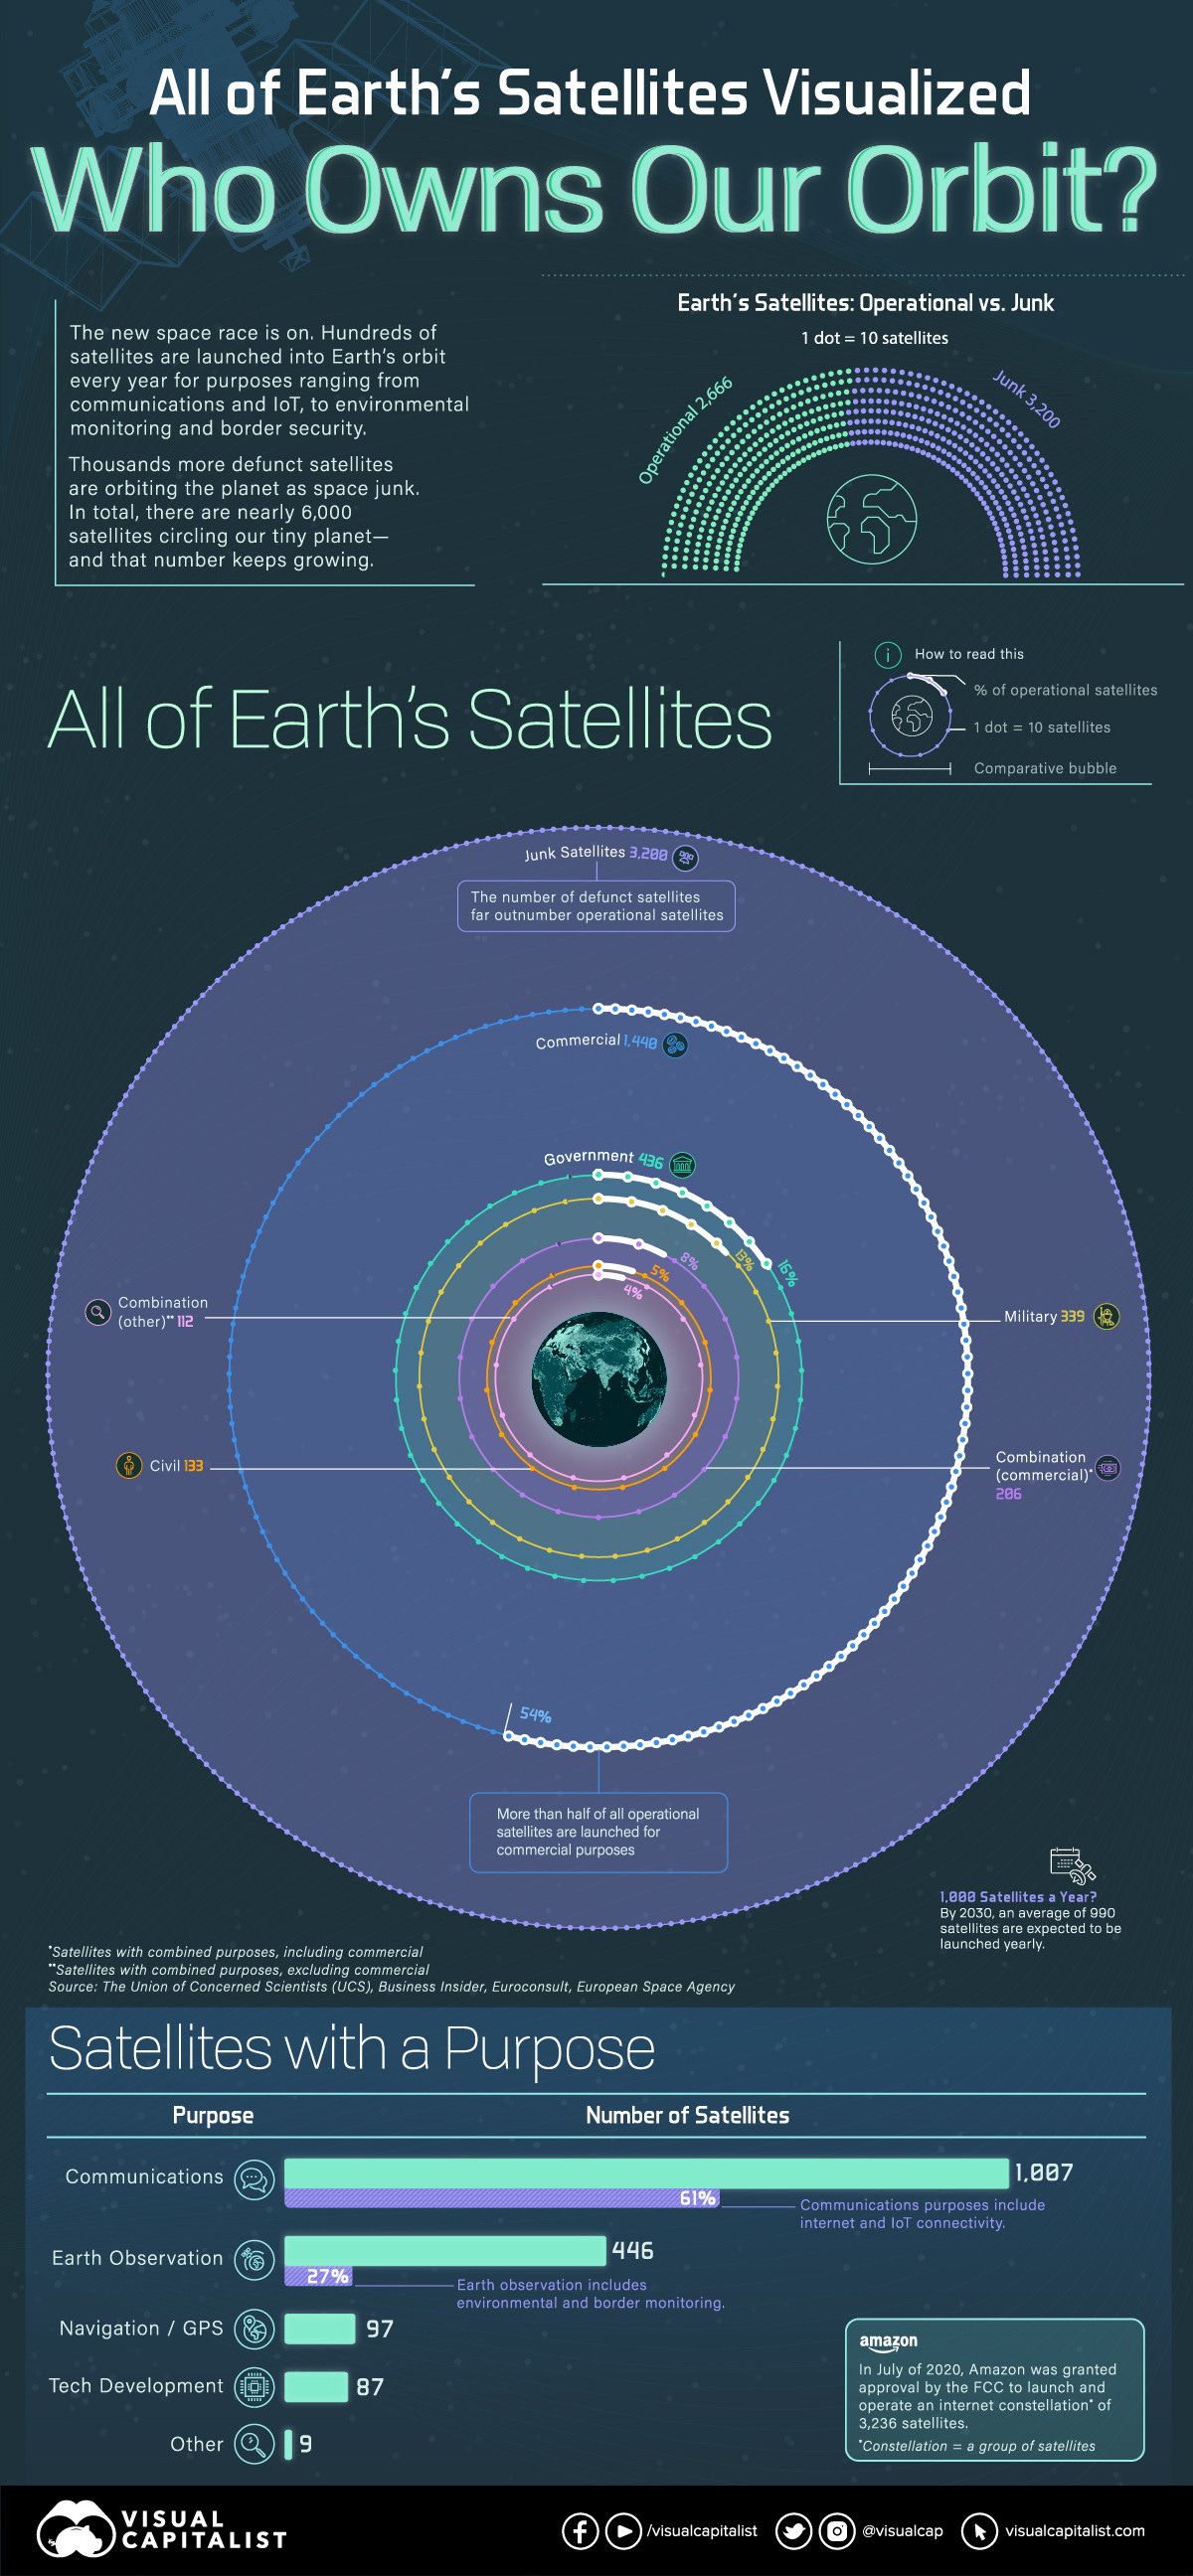 Space satellites Earth orbit communications observations GPS 